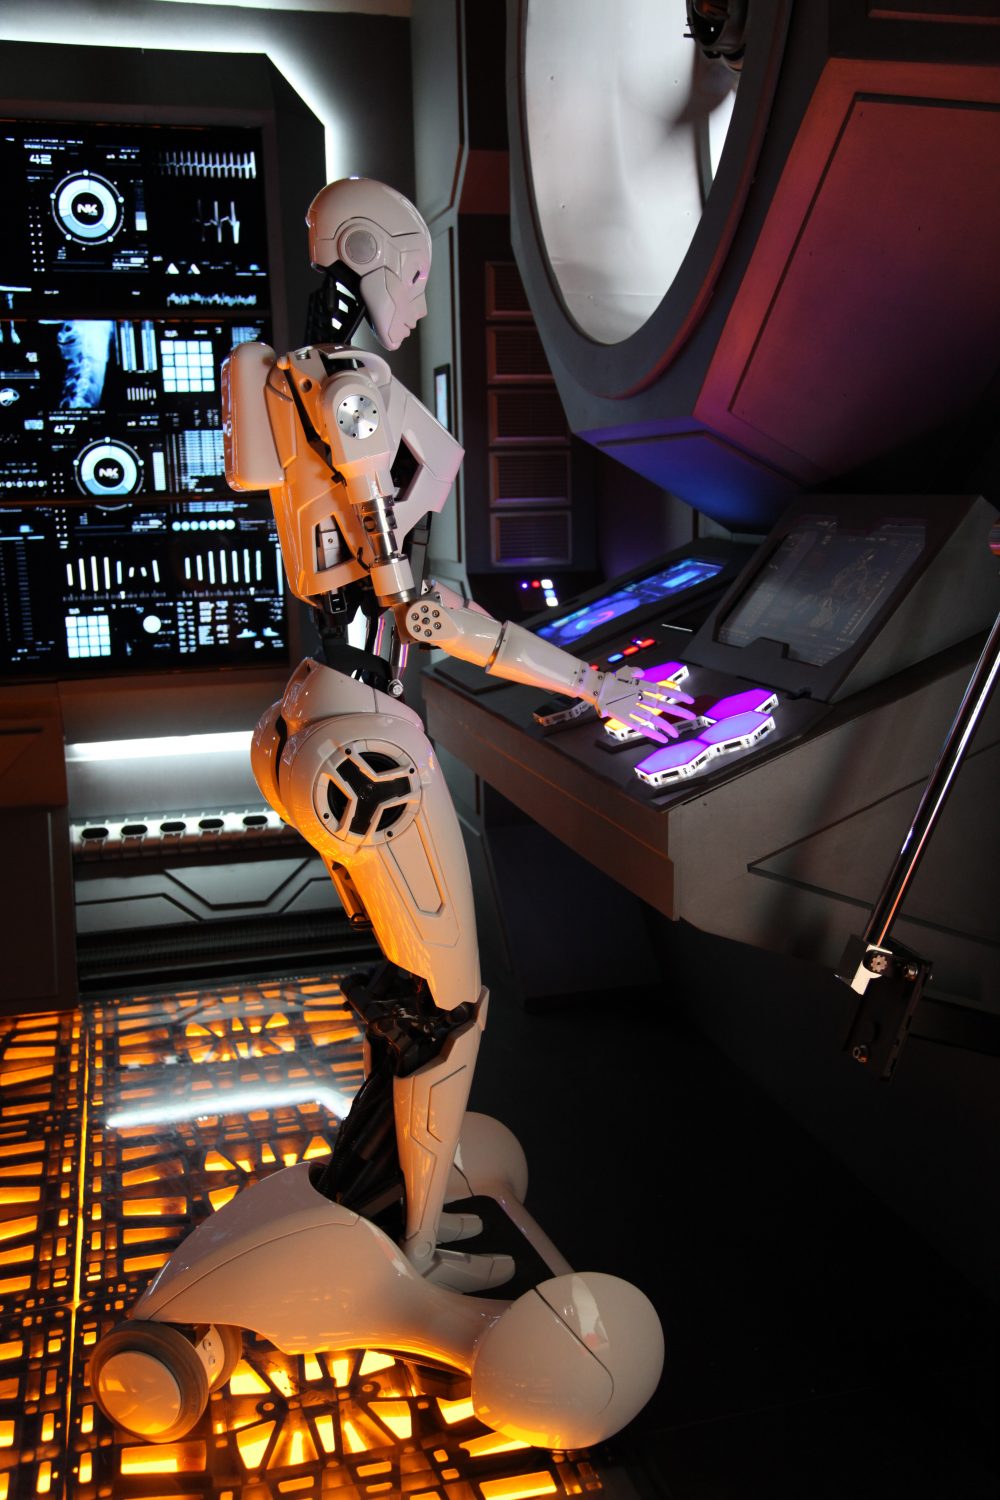 K-na at the controls of her spaceship